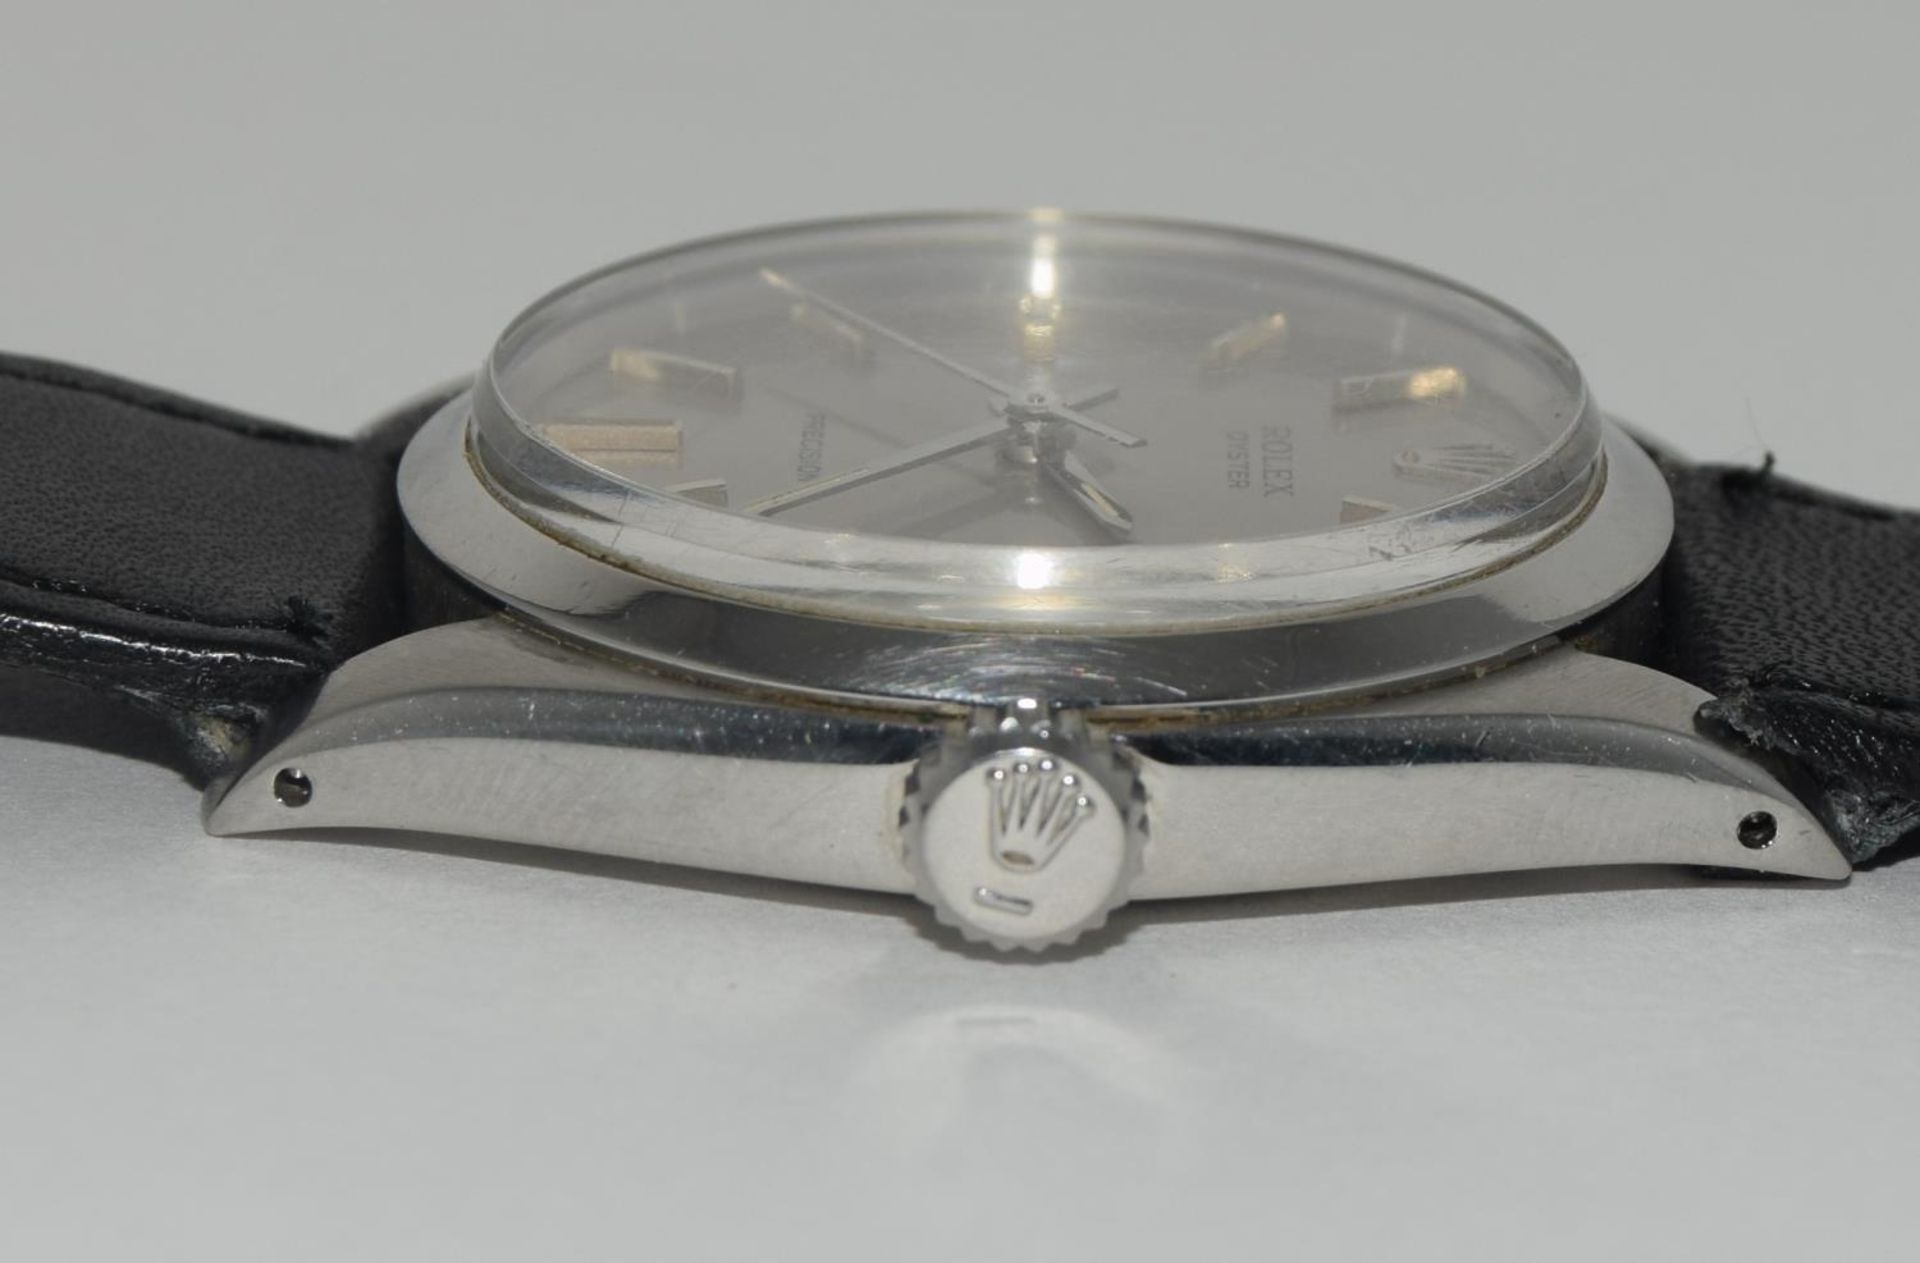 Rolex Oyster Precision silver dial Model 6426, movement 1225 year approx 1973, working condition - Image 4 of 8